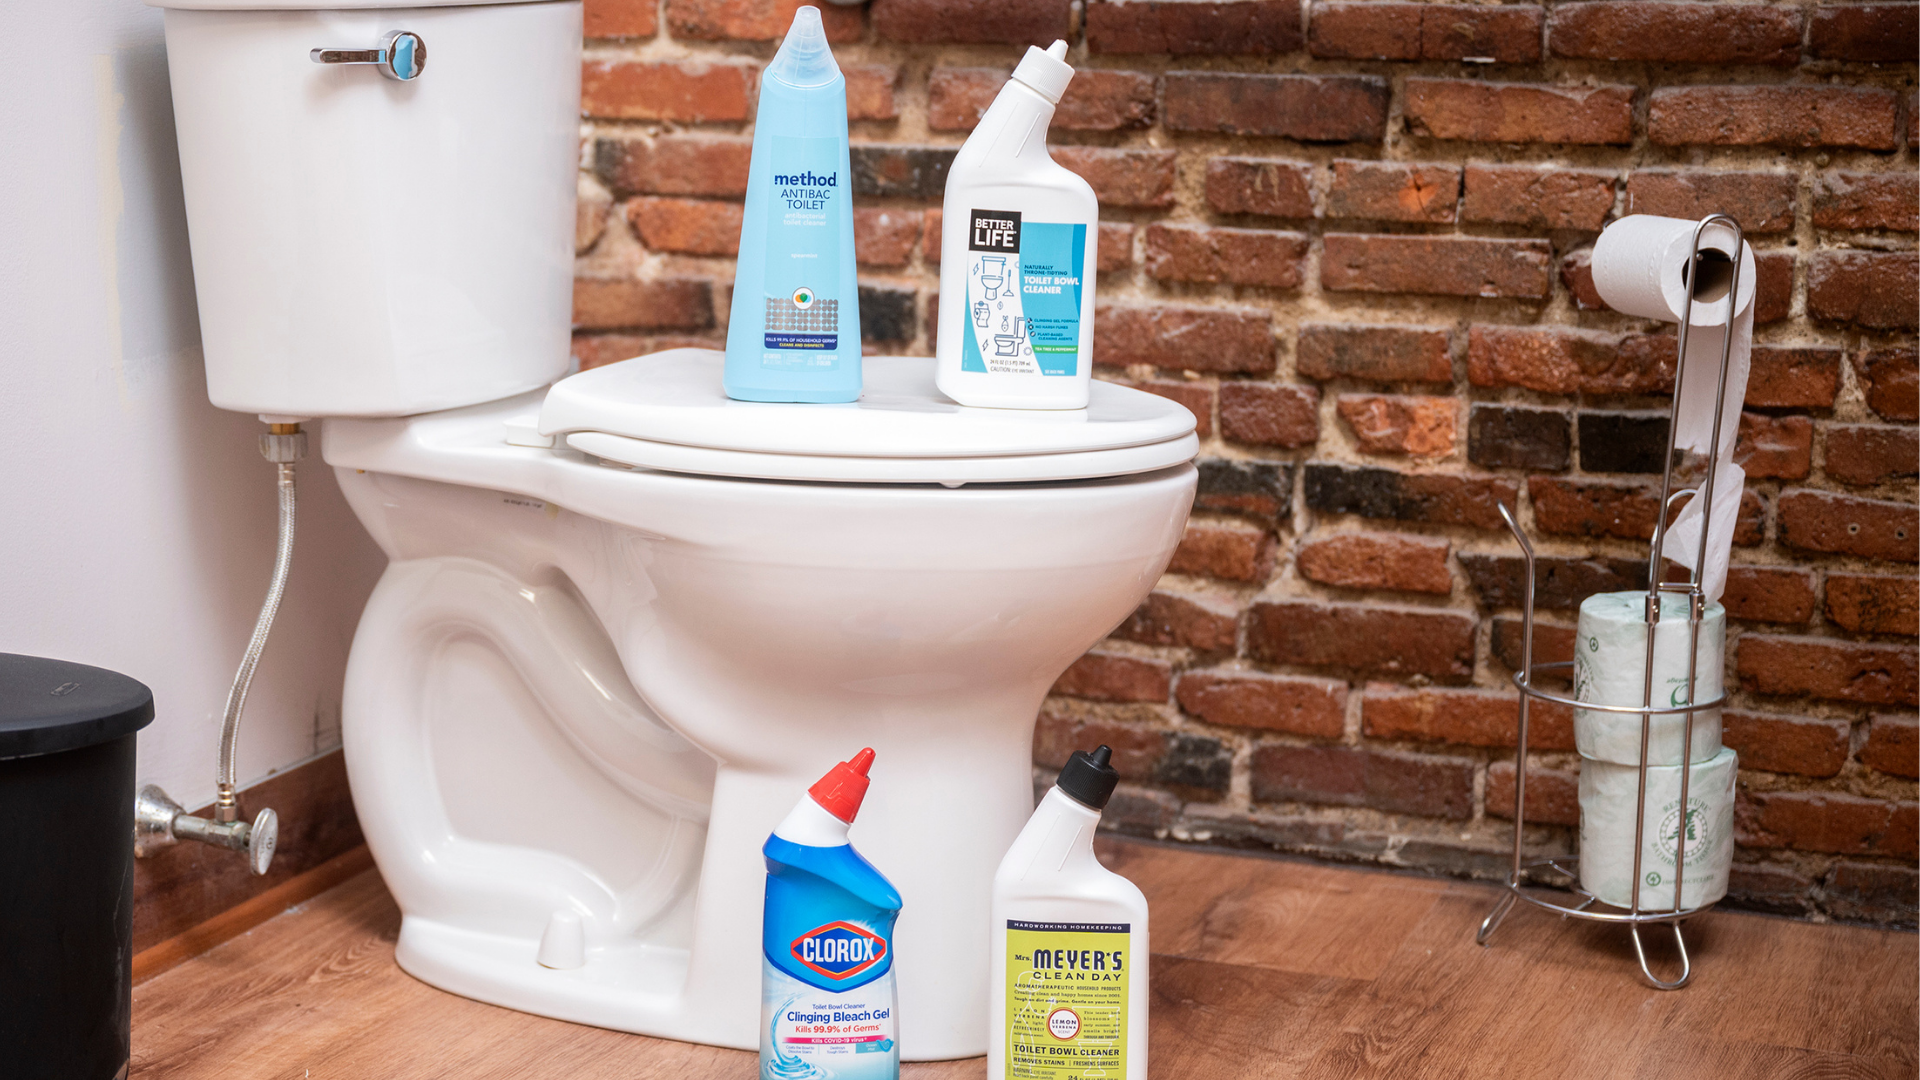 Four bottles of toilet bowl cleaner stand on top of and next to a toilet